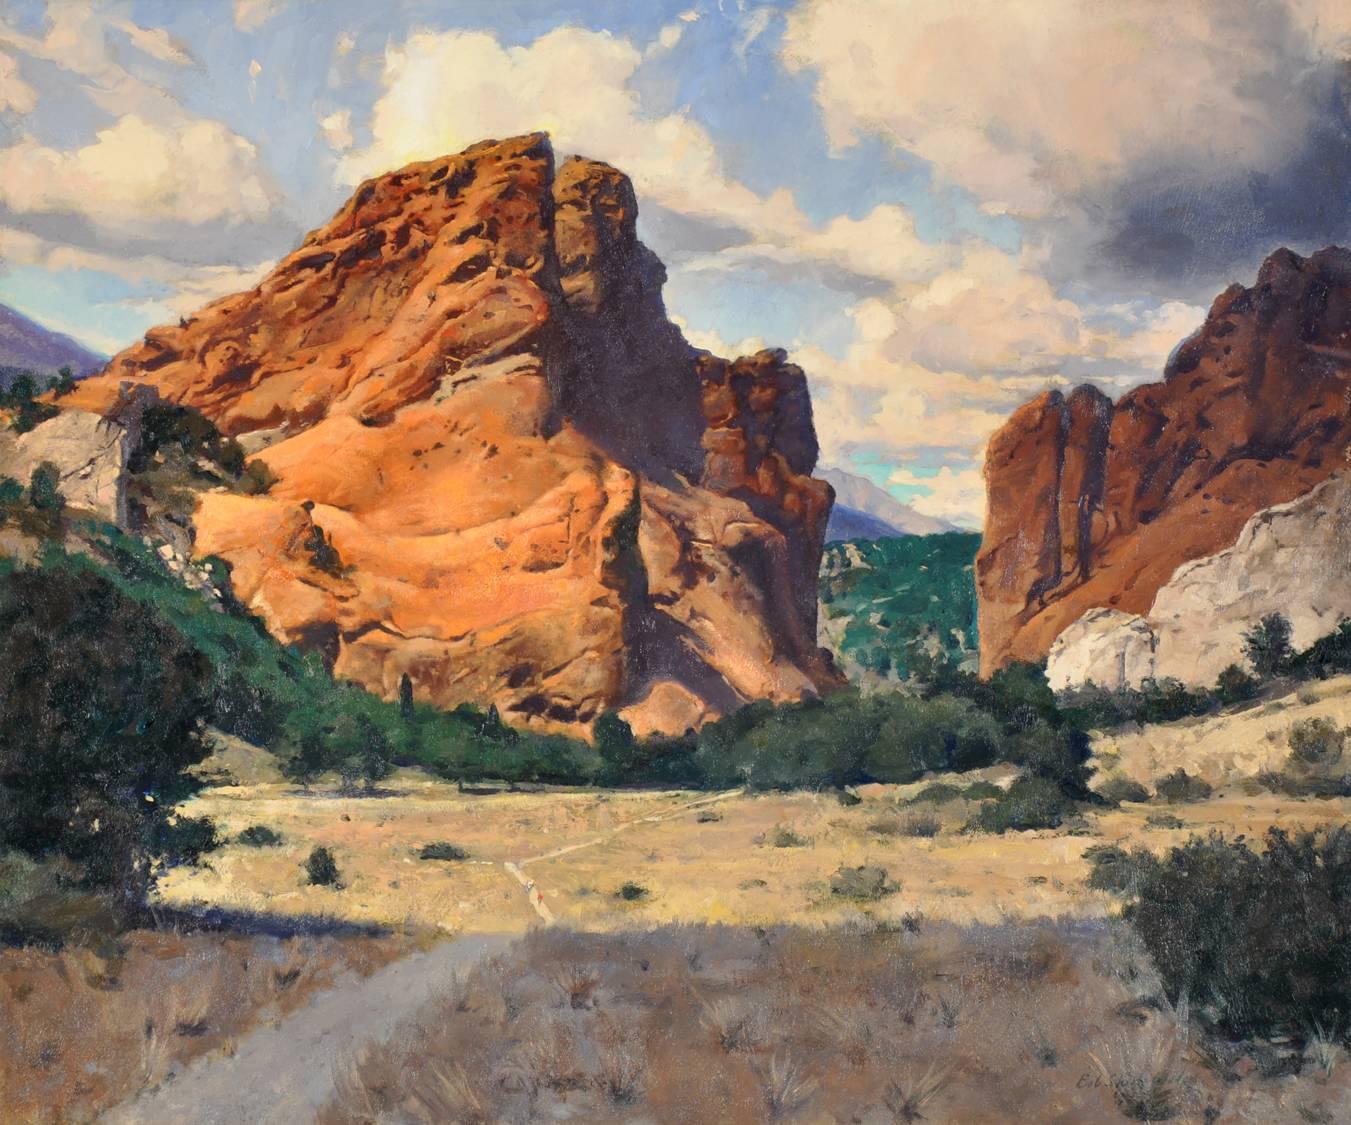 Bob Stuth-Wade Landscape Painting - Into the Garden of the Gods